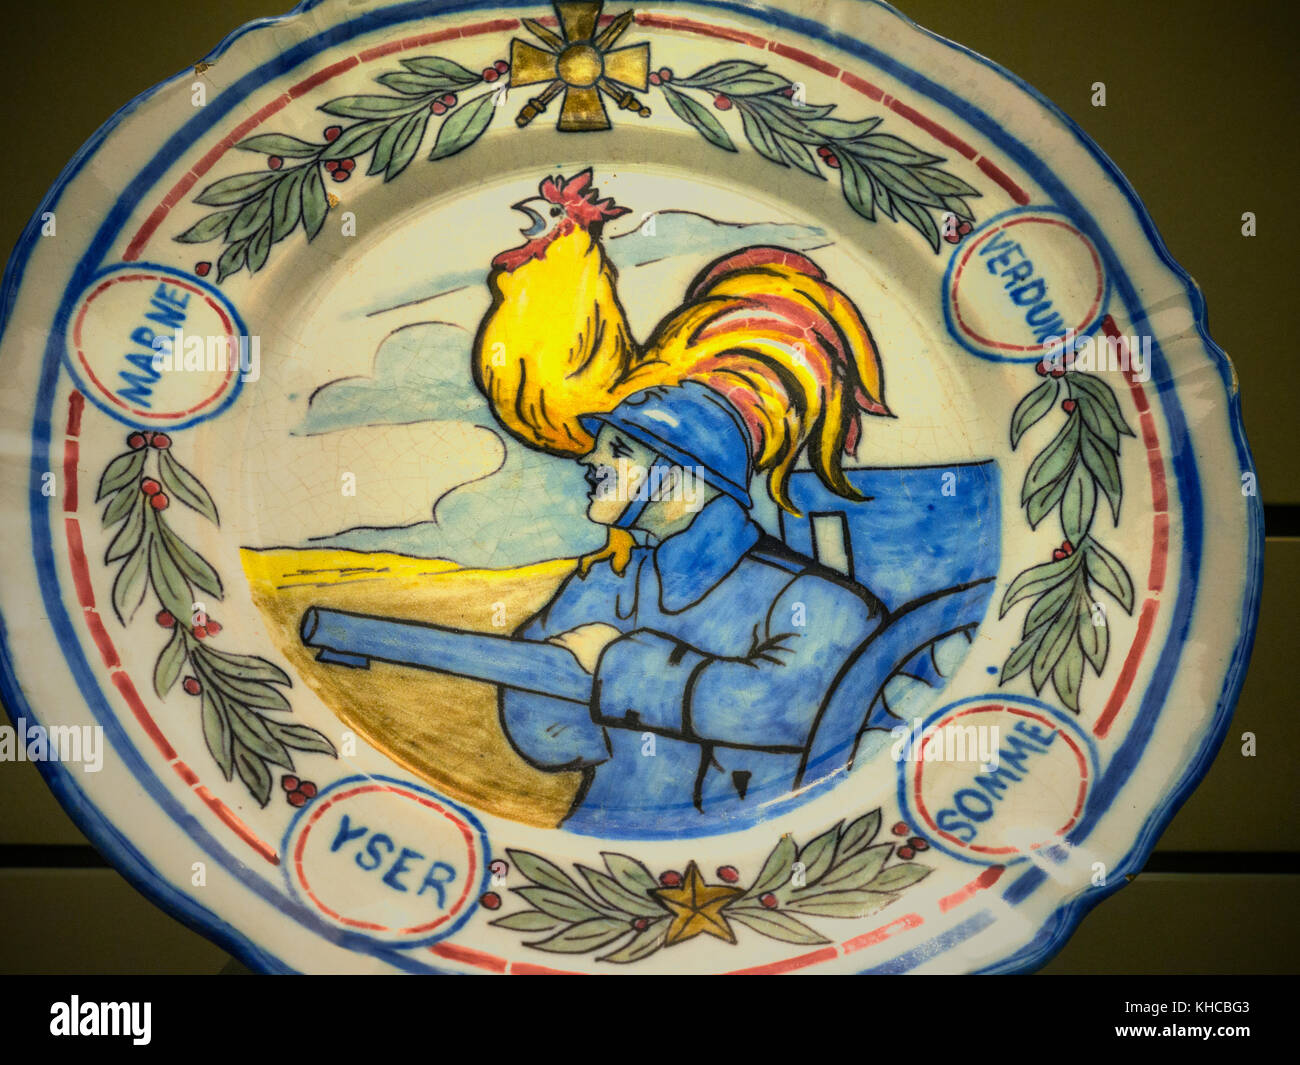 WW1 Commemorative porcelain plate featuring the French Gallic Rooster with a French infantryman and the notable World War One battles of Marne Verdun Somme Yser featured around the plate Stock Photo